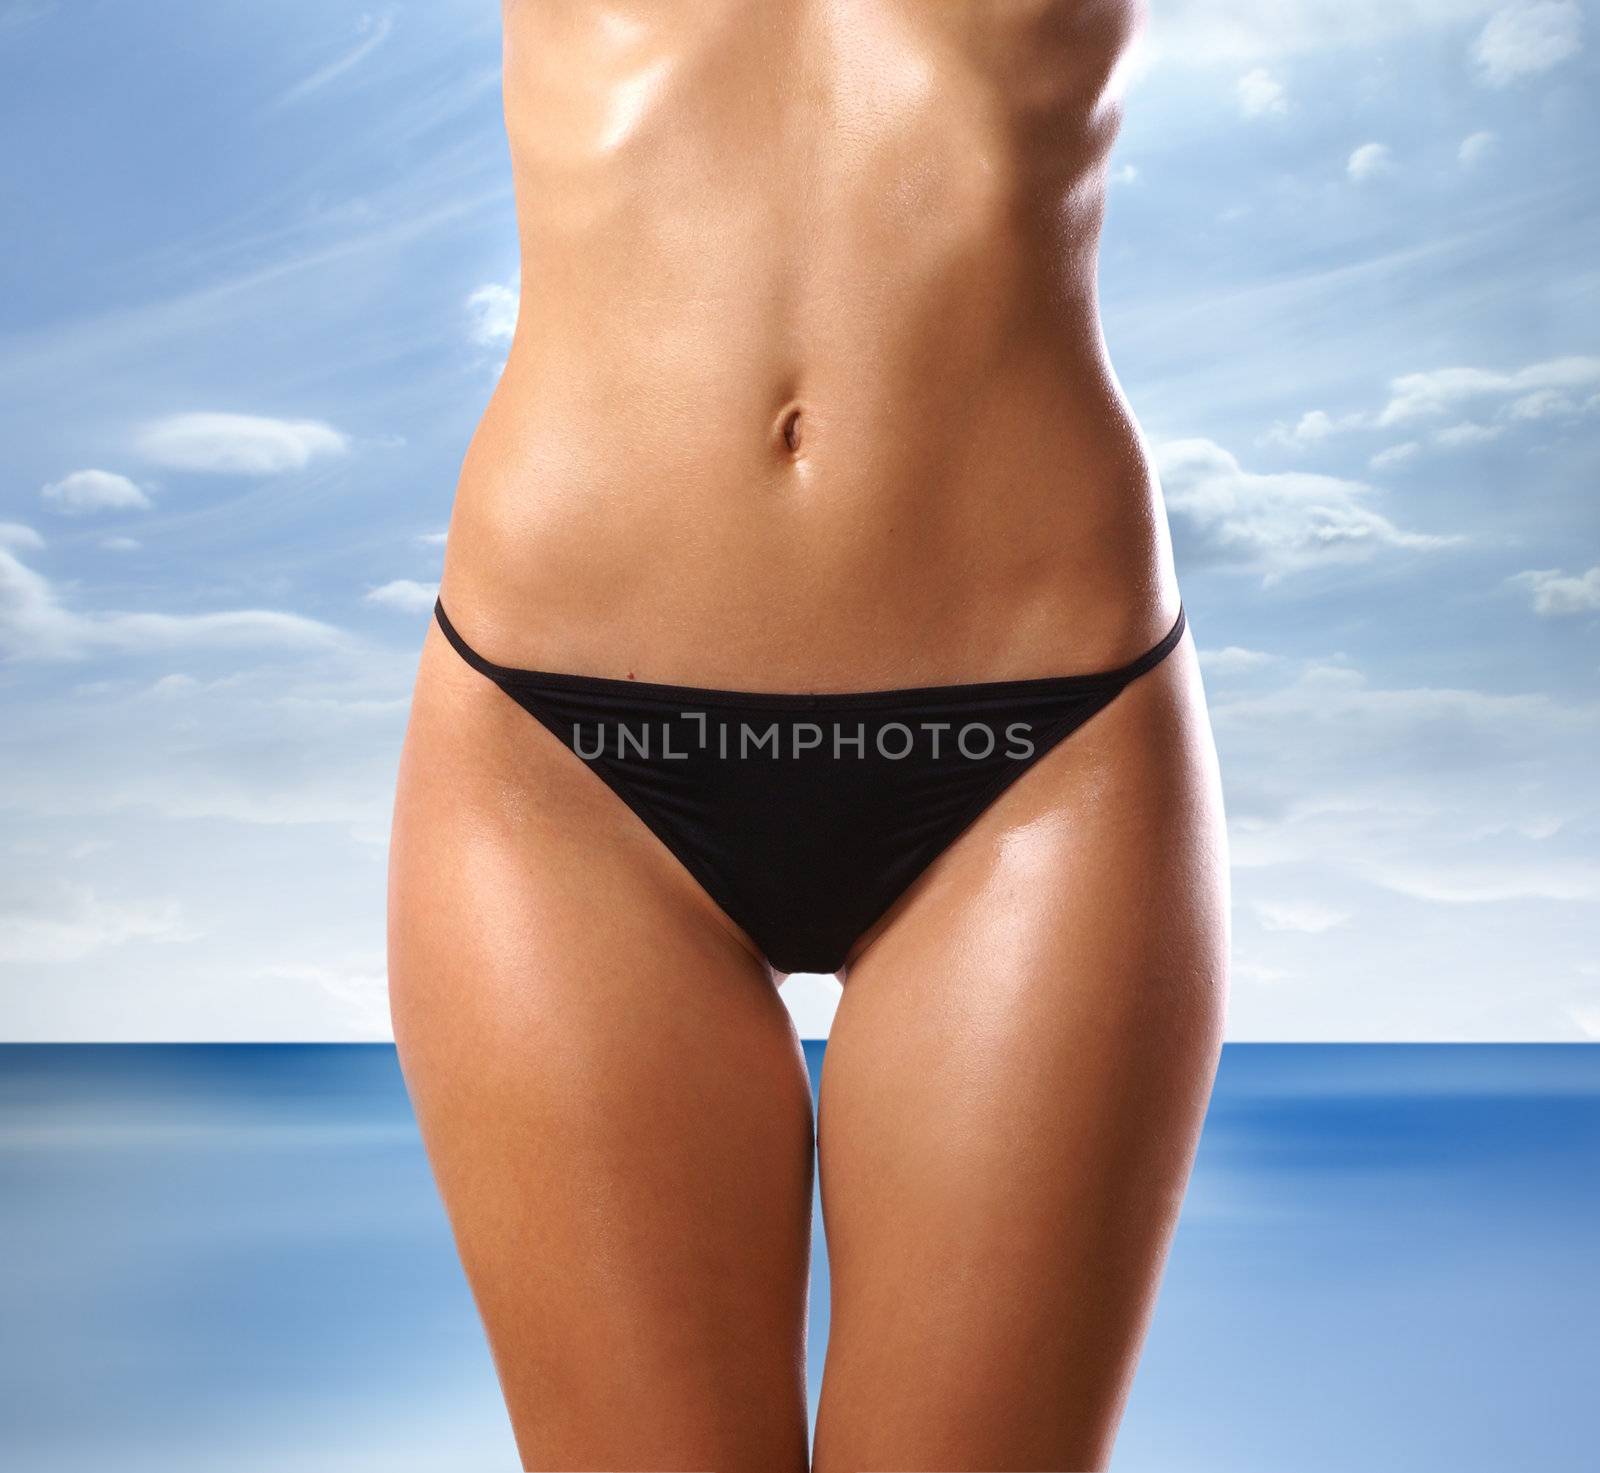 Belly of beautiful woman over abstract resort background